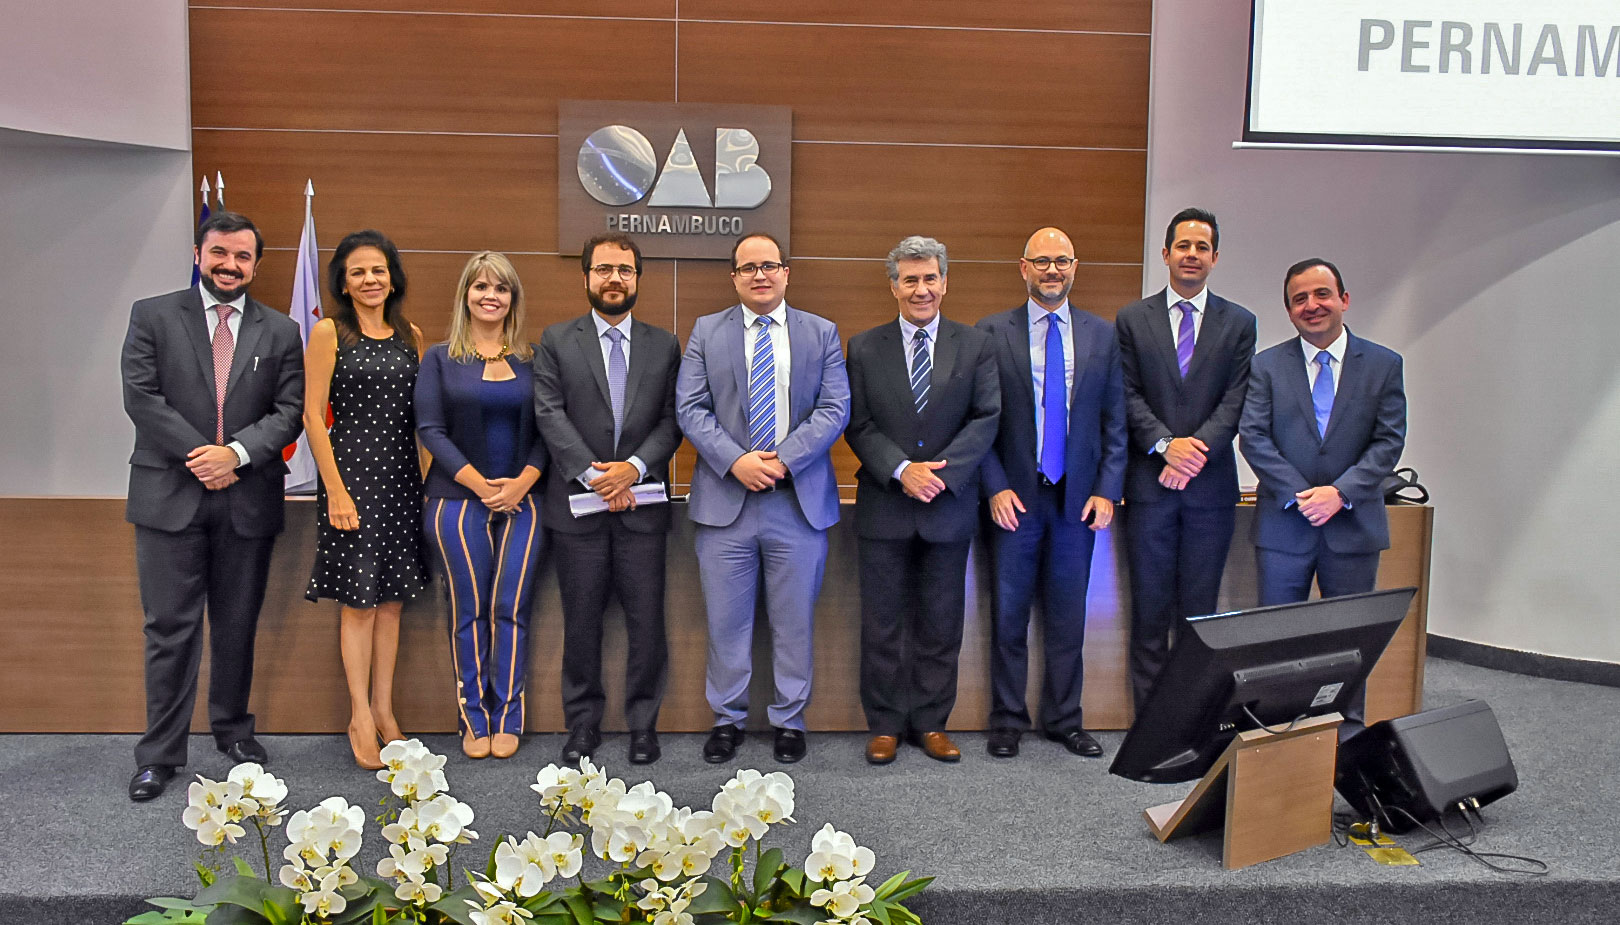 Chamber promotes the Seminar “Arbitration and the Public Administration – Legal, Contract and Procedural Aspects” in Recife